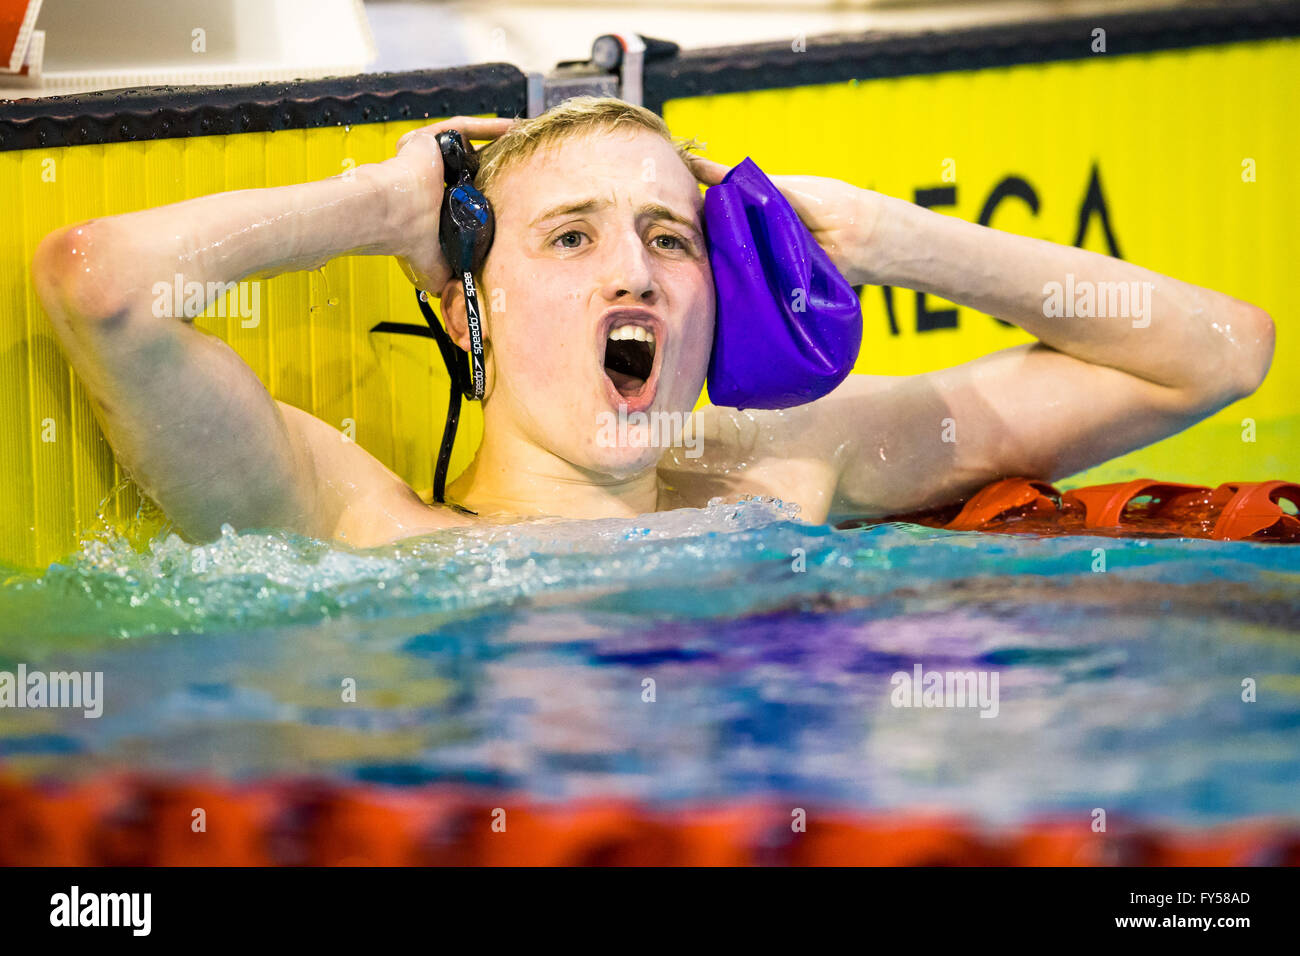 GLASGOW, UK: April, 16, 2016 Timothy Shuttleworth reacts after the Men's 1500m Freestyle Final Stock Photo